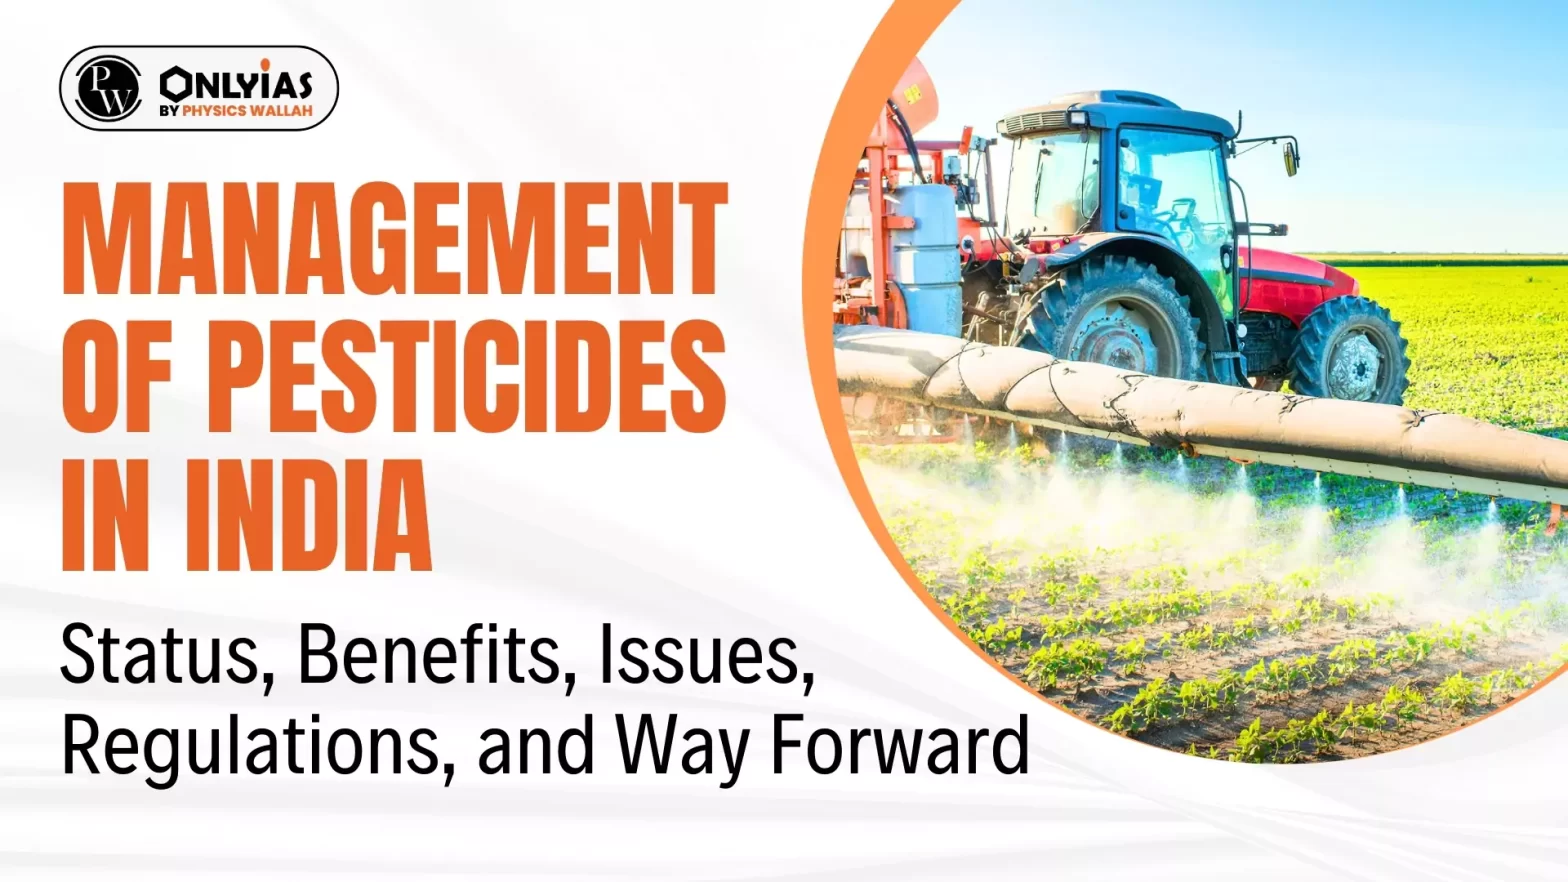 Management of Pesticides in India: Status, Benefits, Issues, Regulations, and Way Forward